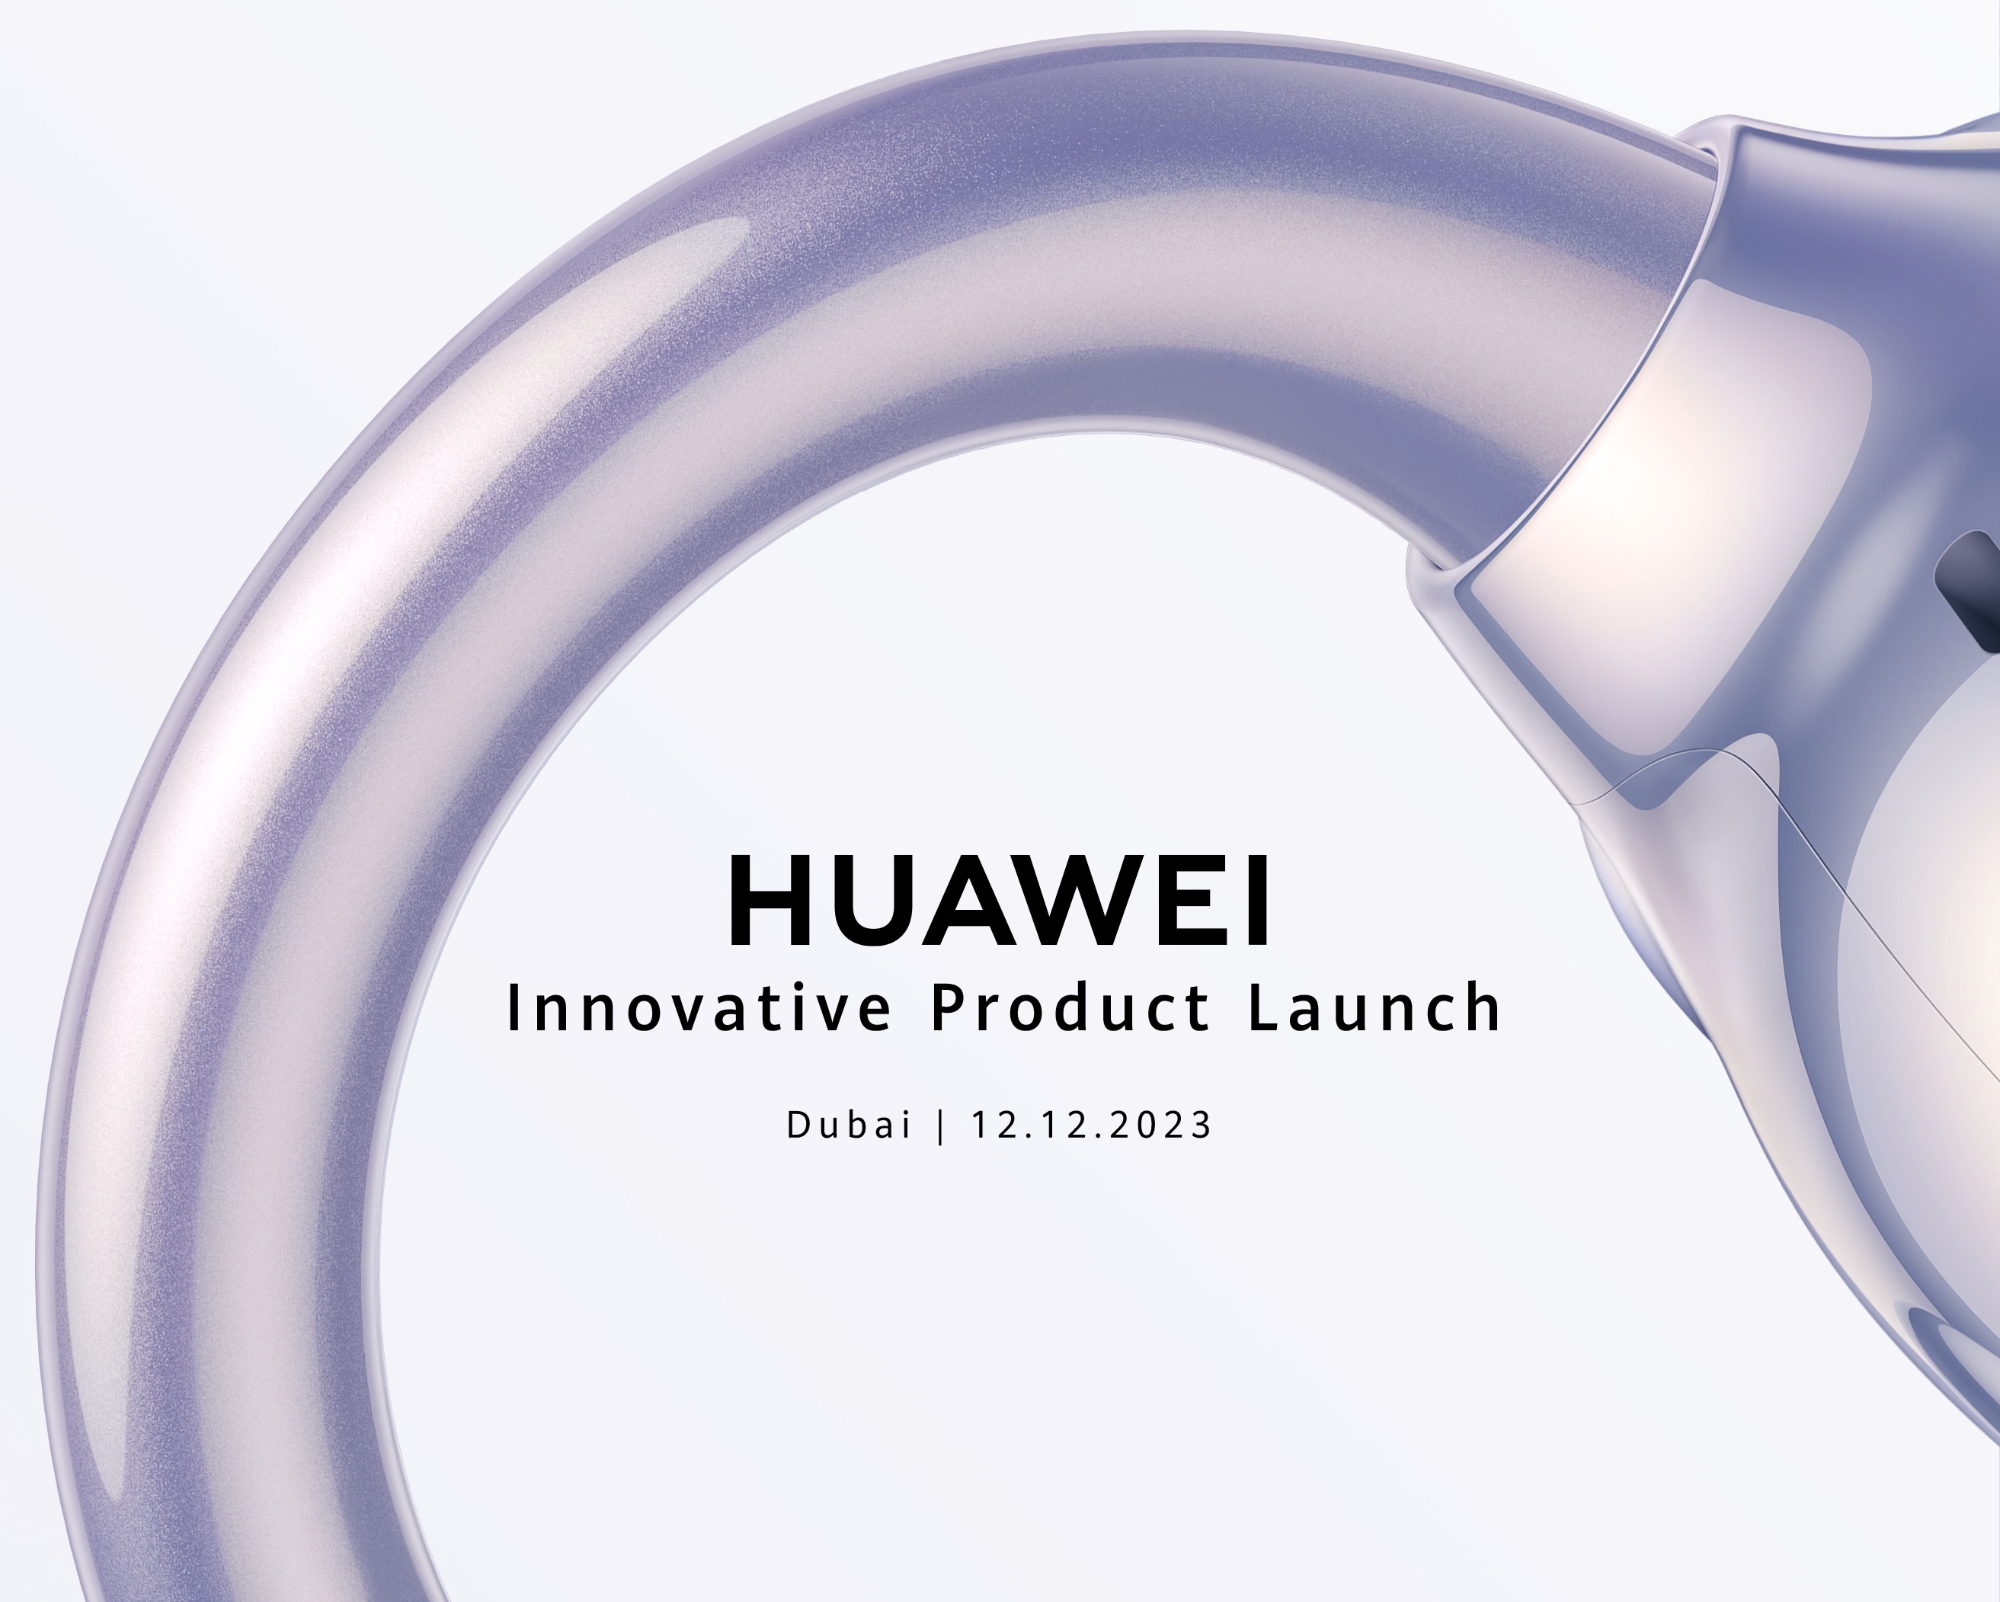 Huawei will unveil new wireless headphones in the global market on December 12